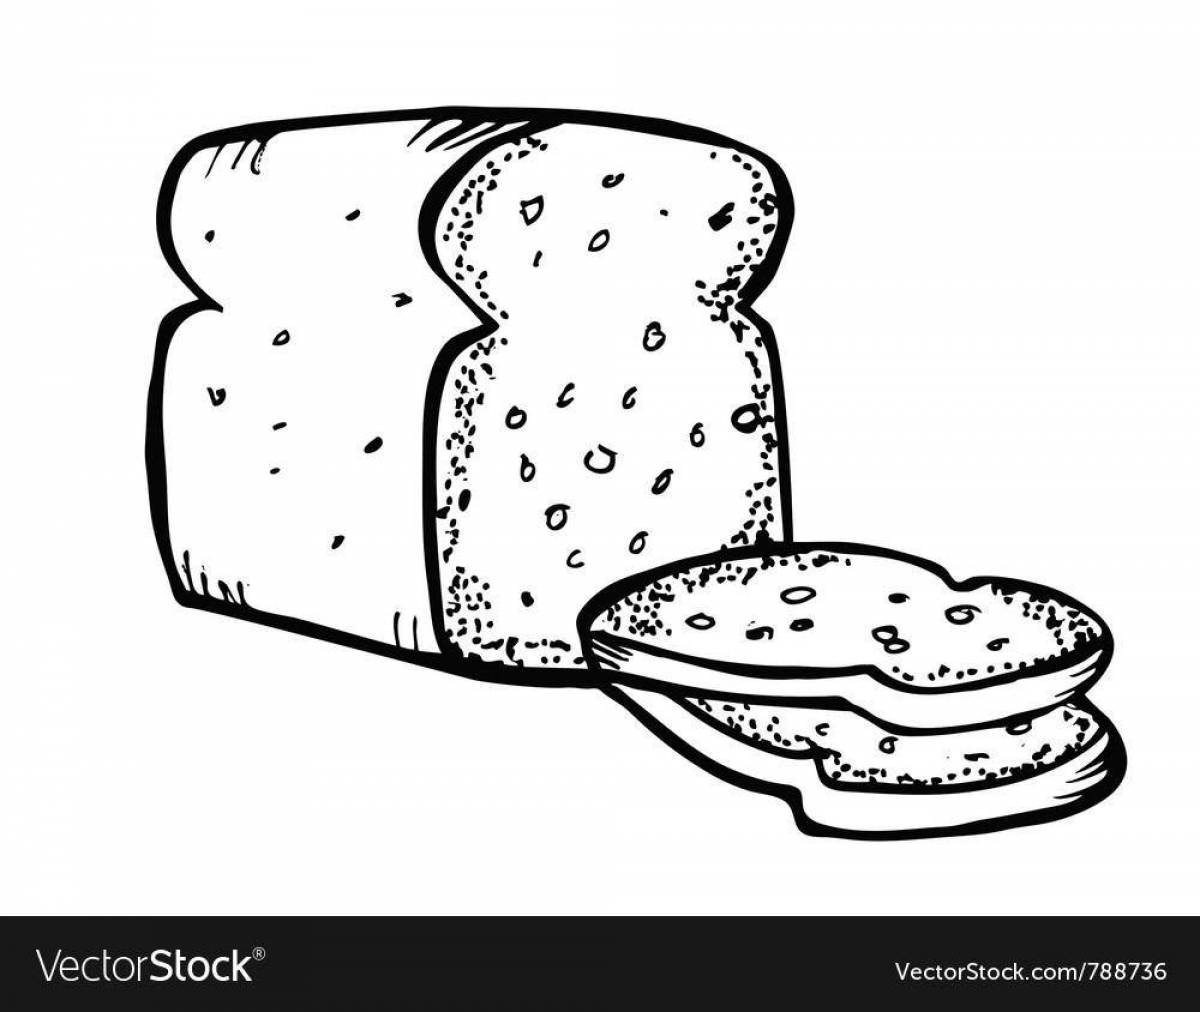 Inviting coloring of a piece of bread